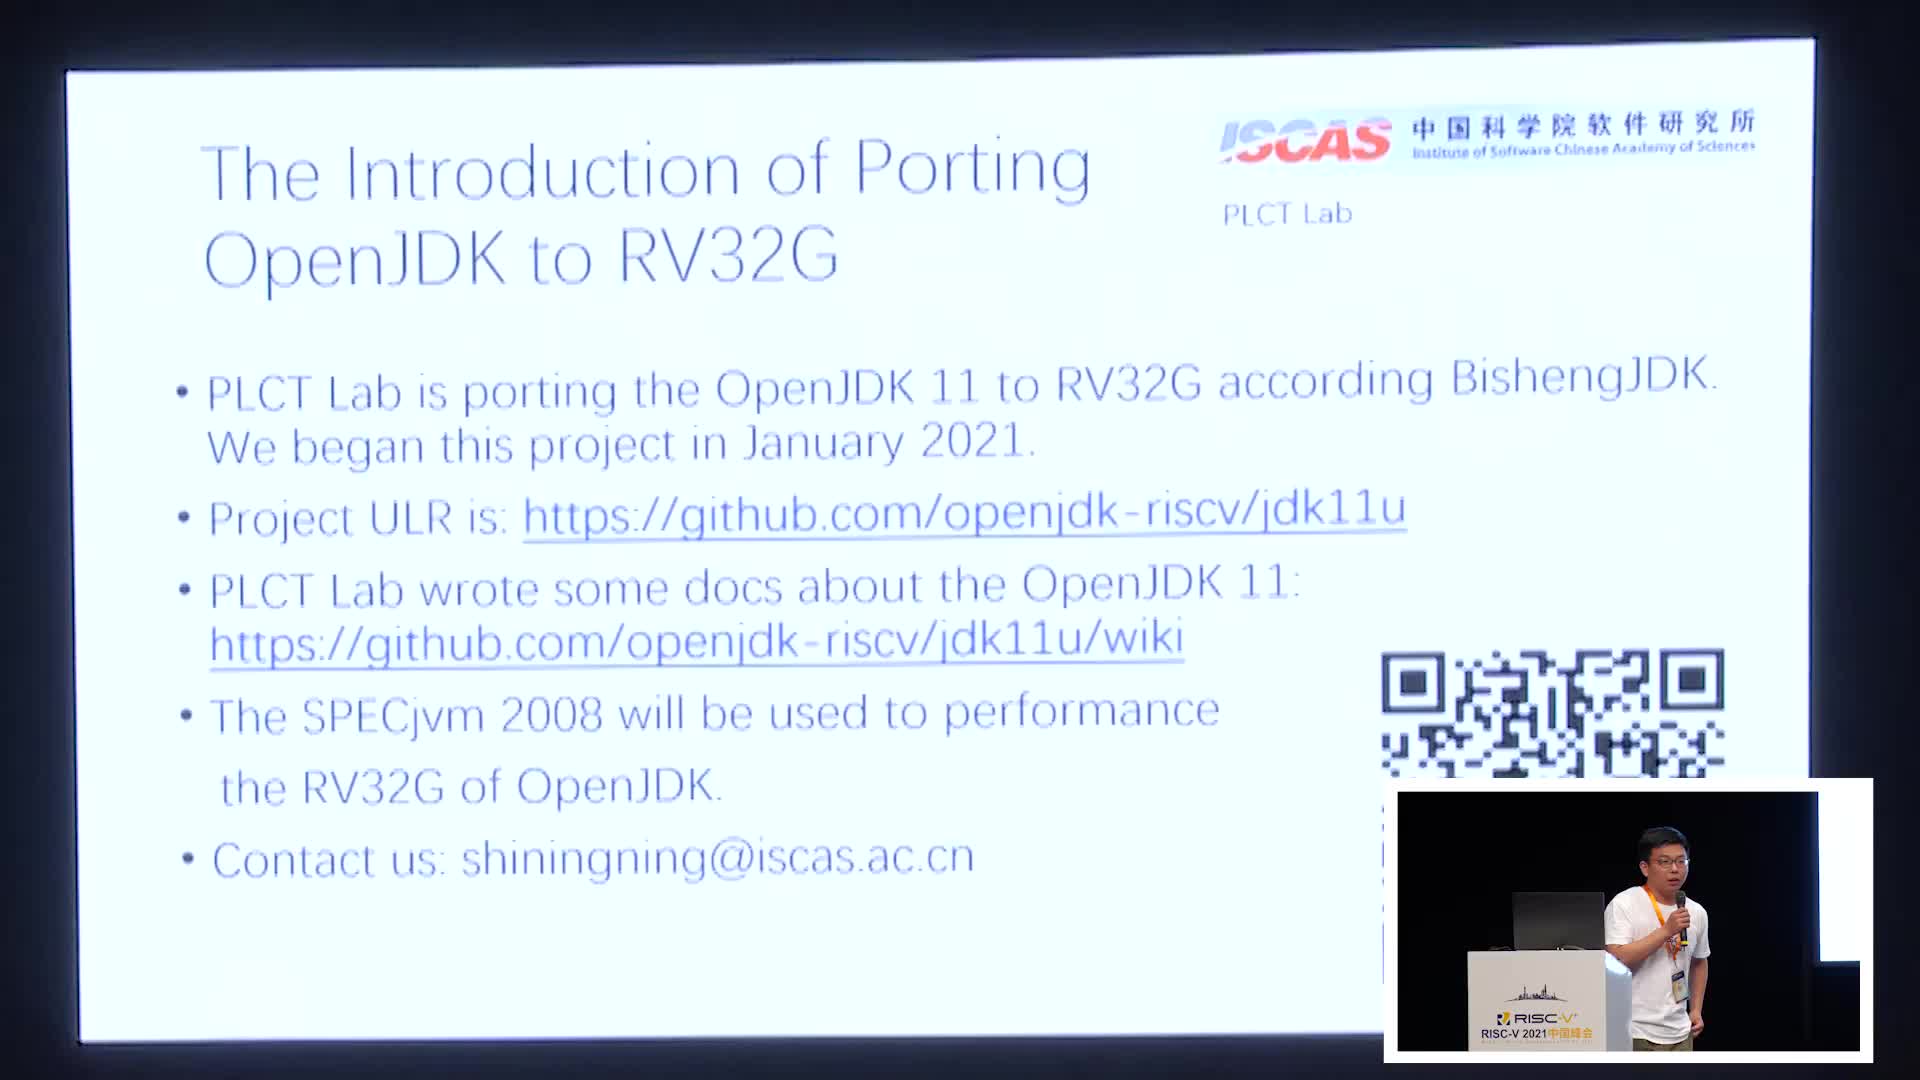 POSTER - The Introduction of Porting OpenJDK to RV32G -